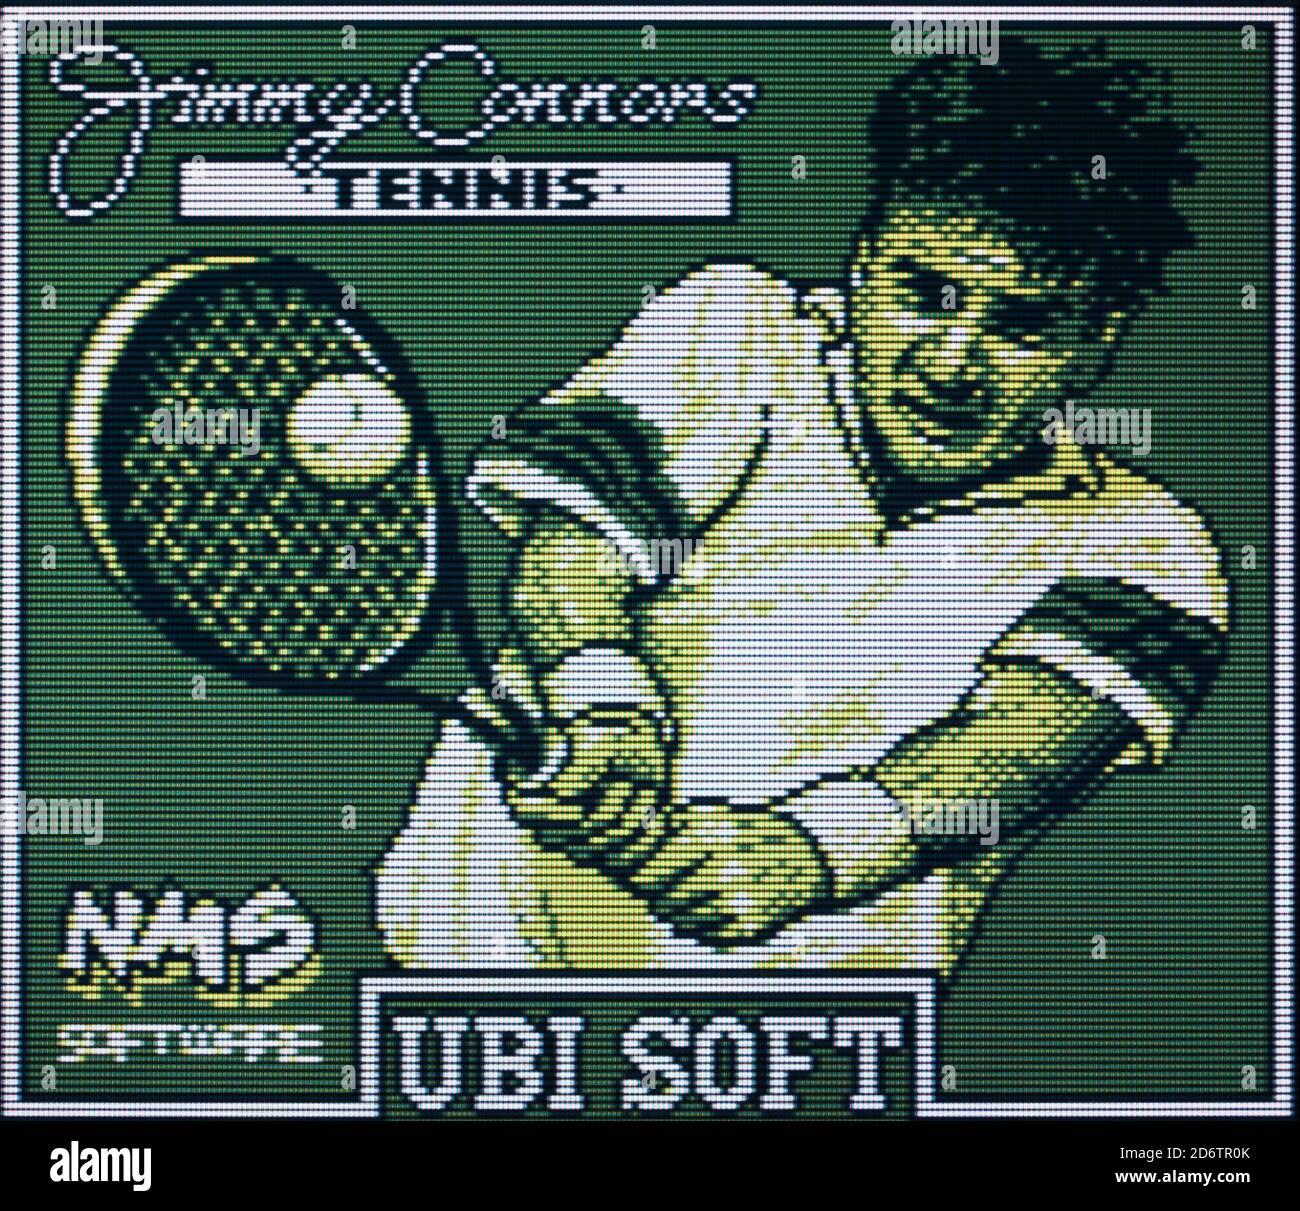 Jimmy Connors Tennis - Nintendo Gameboy Videogame - Editorial use only  Stock Photo - Alamy